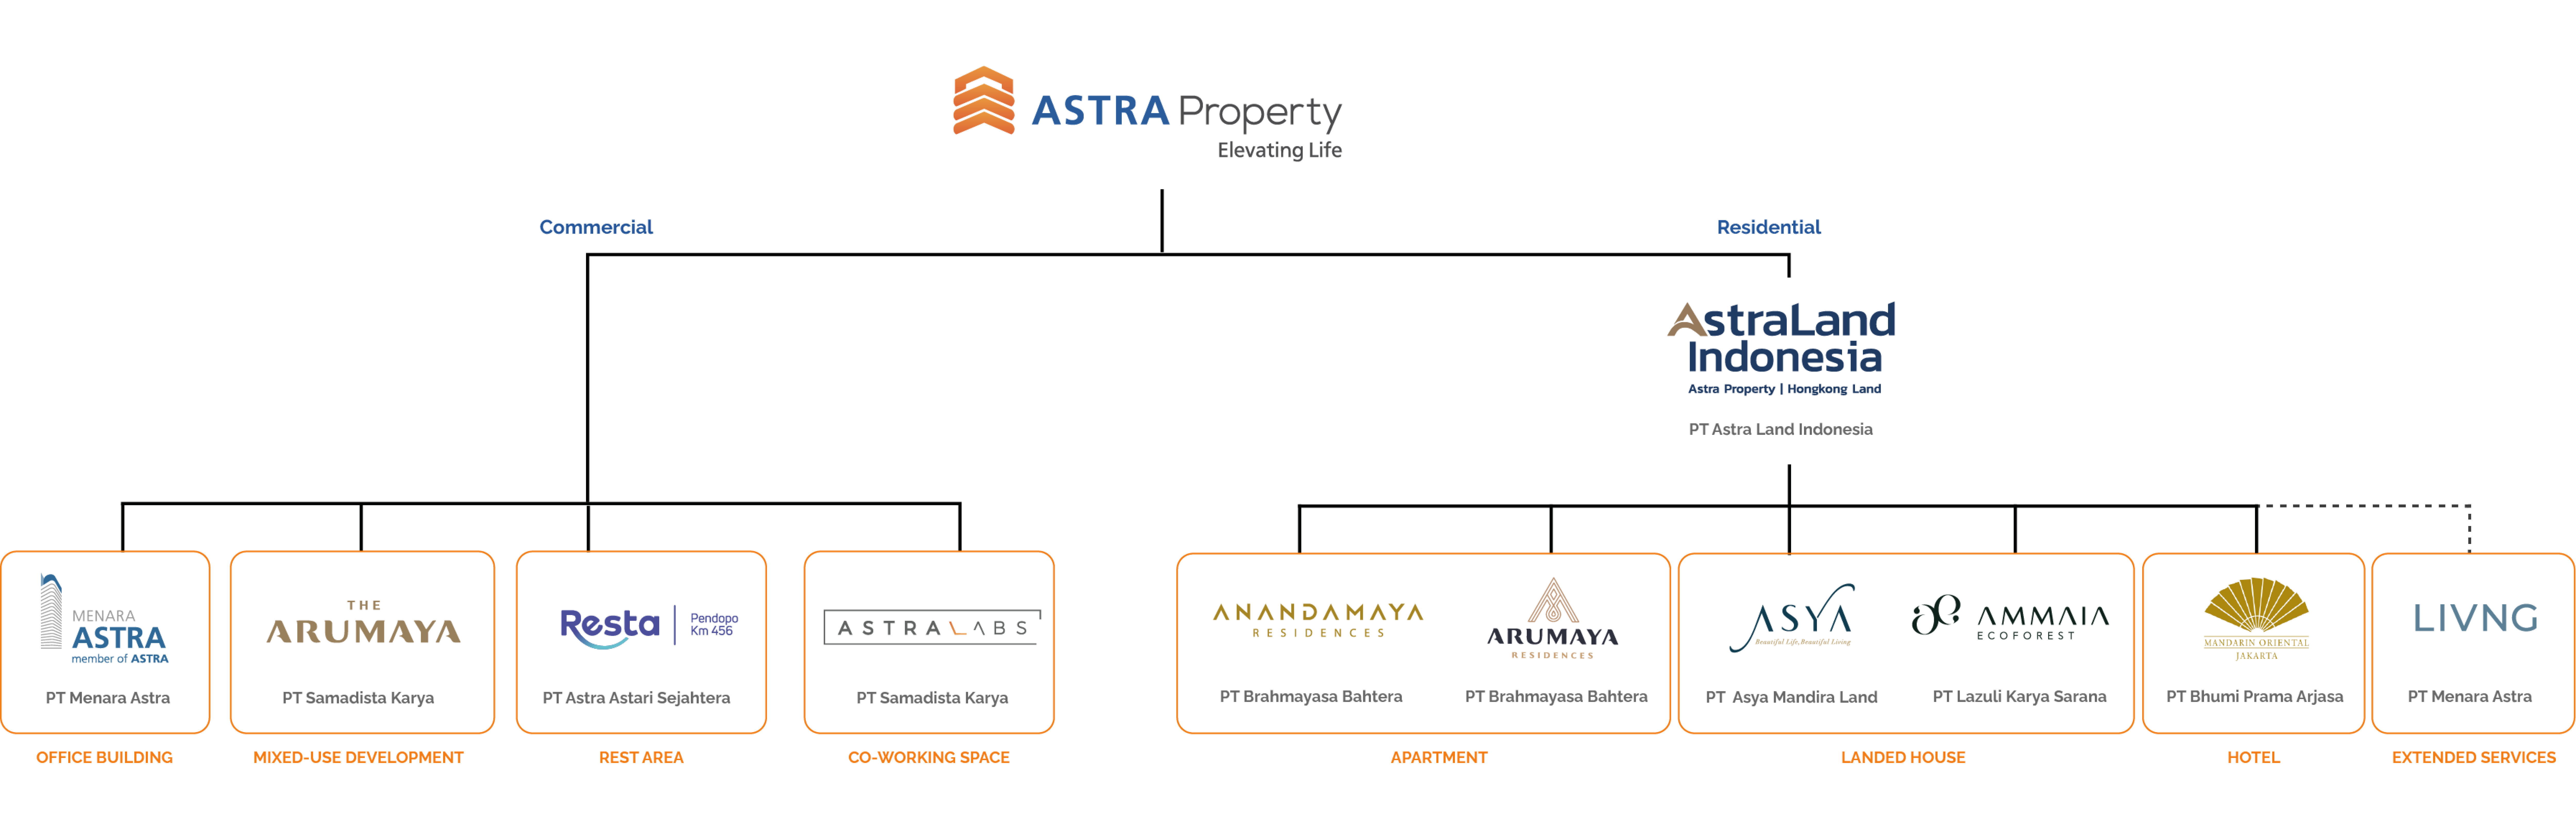 Organizational Structure - Astra Property